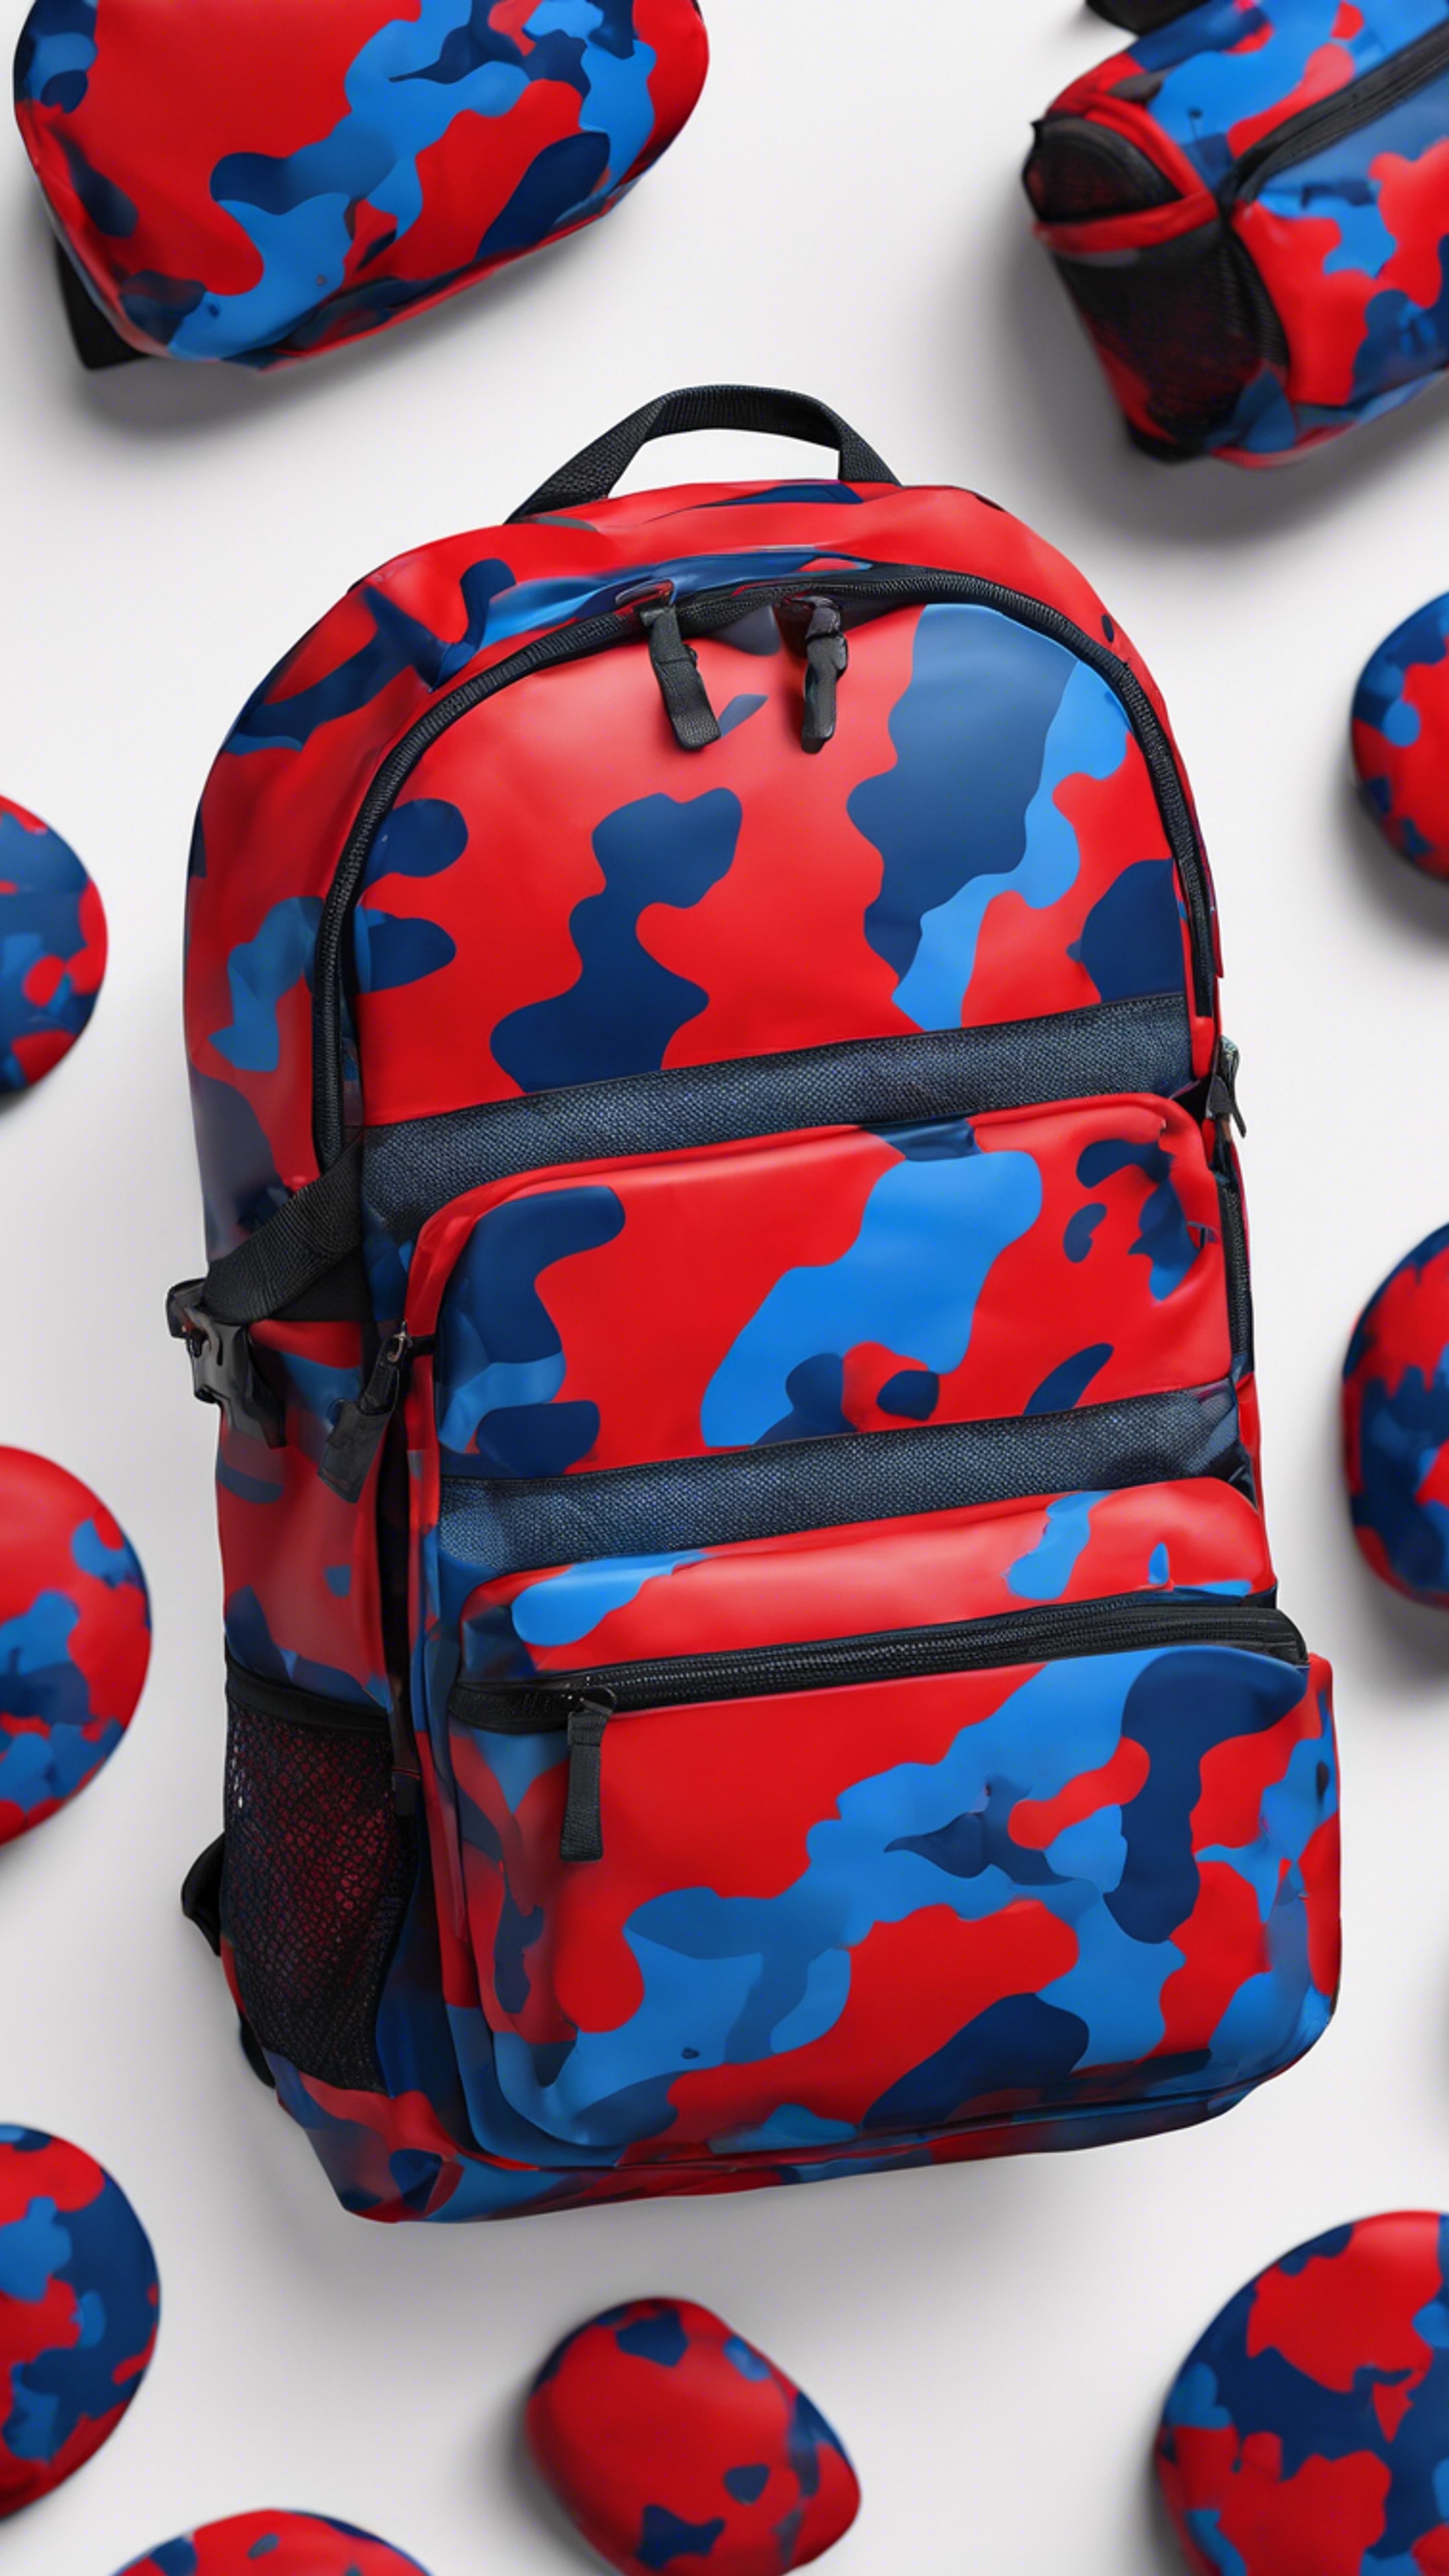 A seamless pattern of red and blue camouflage like on a sports backpack. Hintergrund[ebf2c58b20f943e08eab]